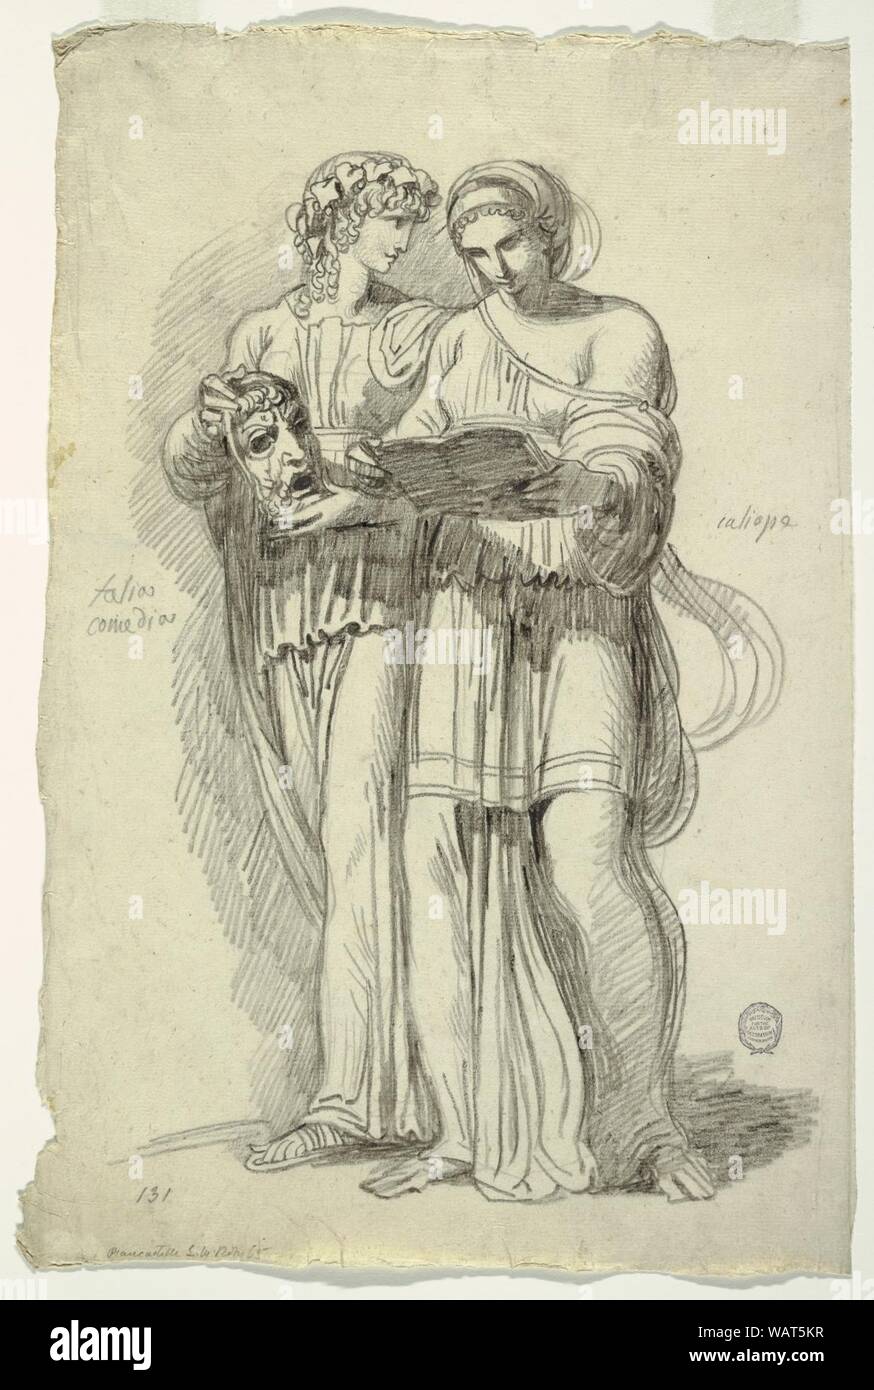 Drawing, Thalia, Muse of Comedy and Calliope, Muse of Epic Poetry, ca. 1820 Stock Photo